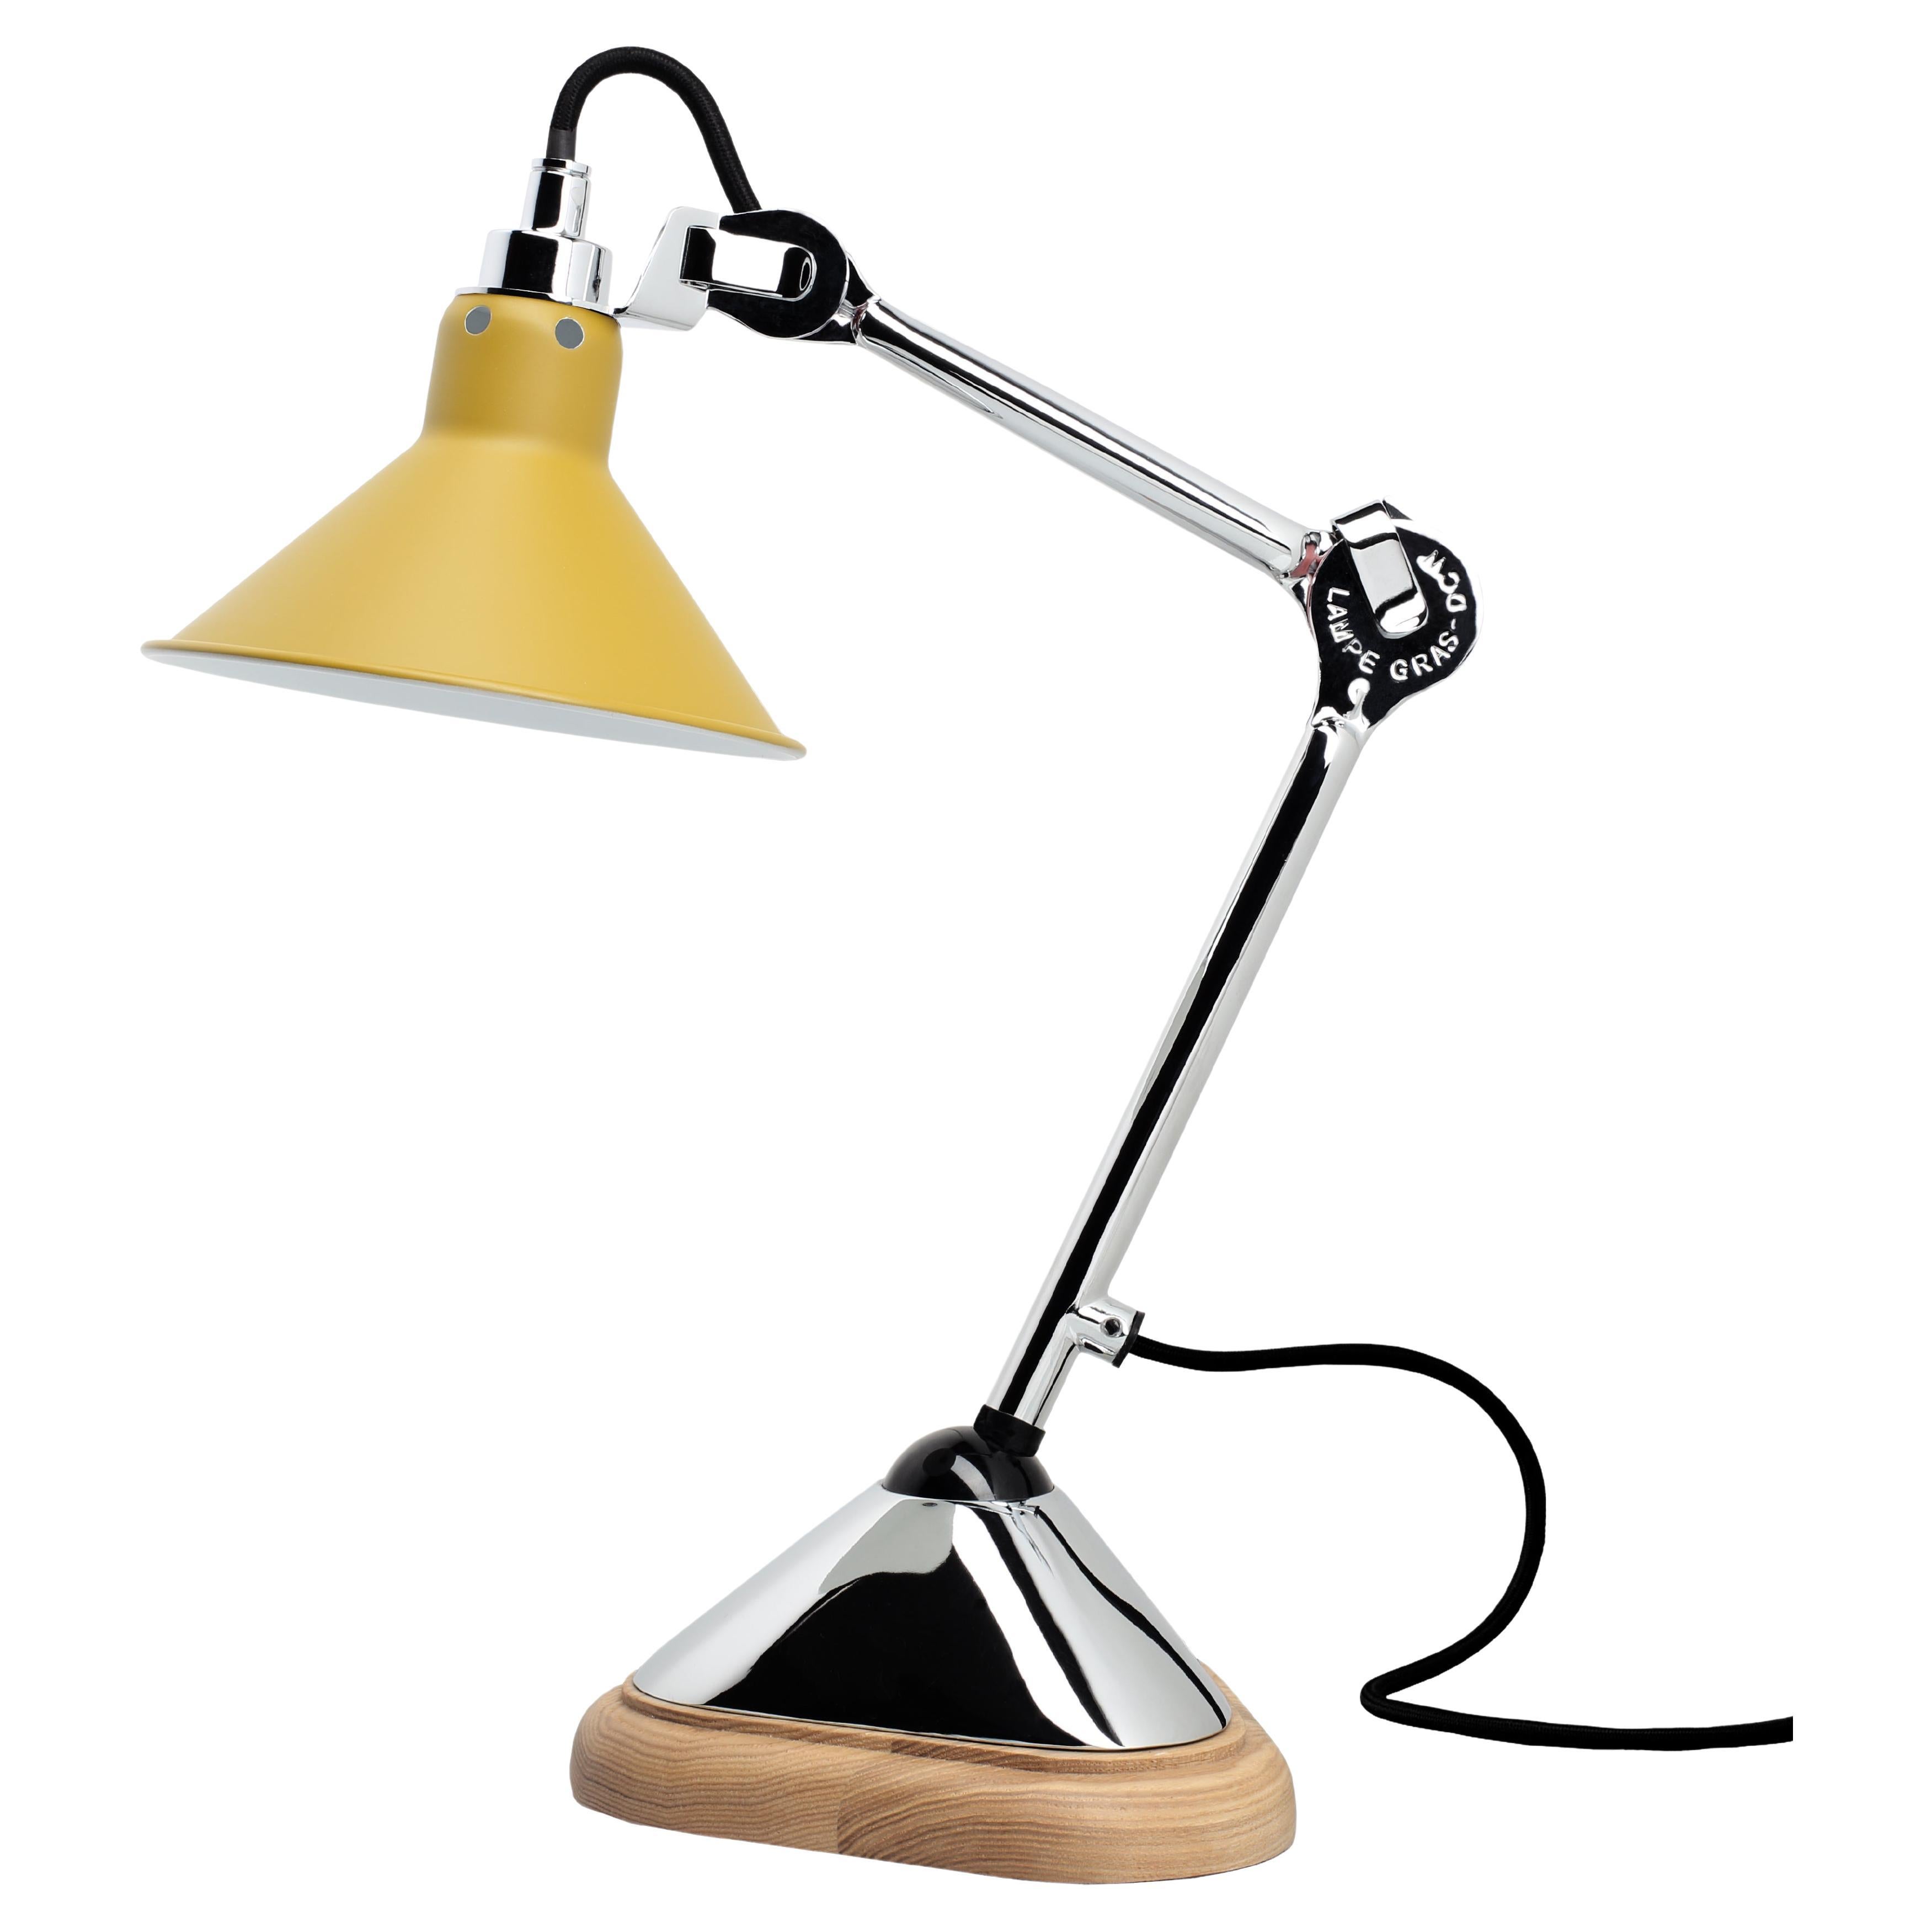 DCW Editions La Lampe Gras N°207 Conic Table Lamp in Chrome Arm & Yellow Shade For Sale